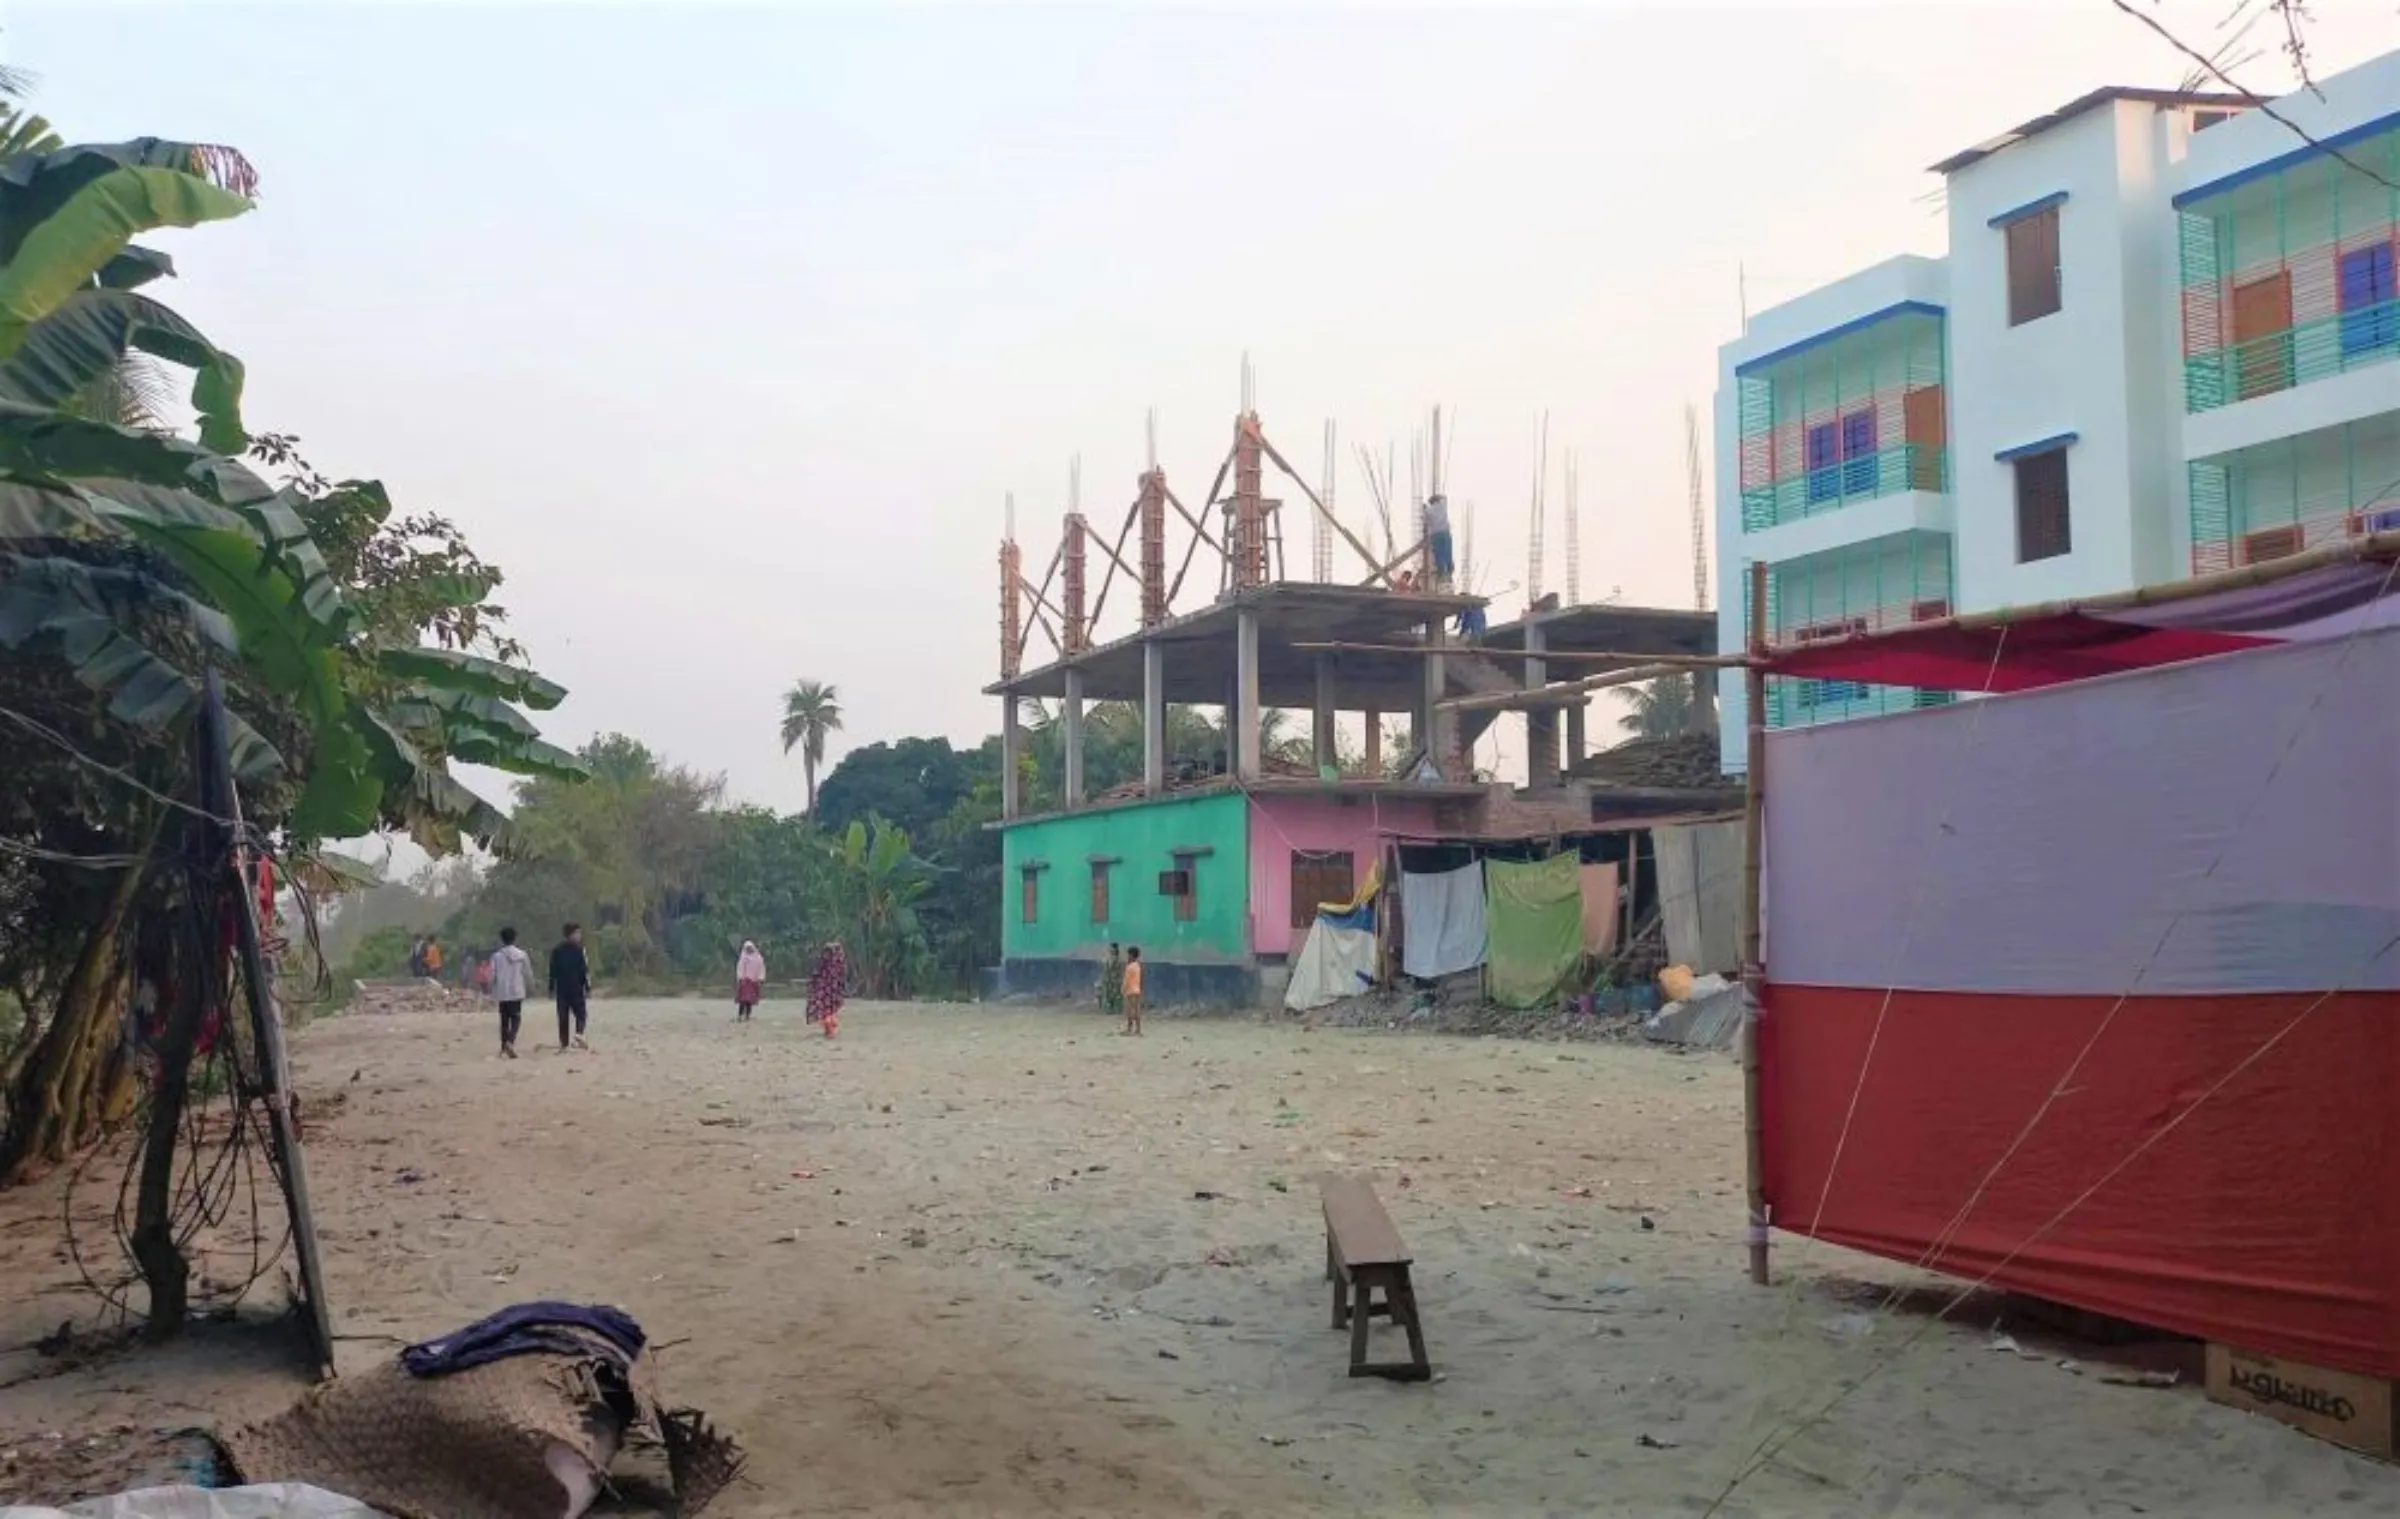 New buildings sprout up in the neighborhood near the economic zone in the context of bullish trends in the land market, Narayanganj, Bangladesh, January 11, 2022, Thomson Reuters Foundation/ Md. Tahmid Zami